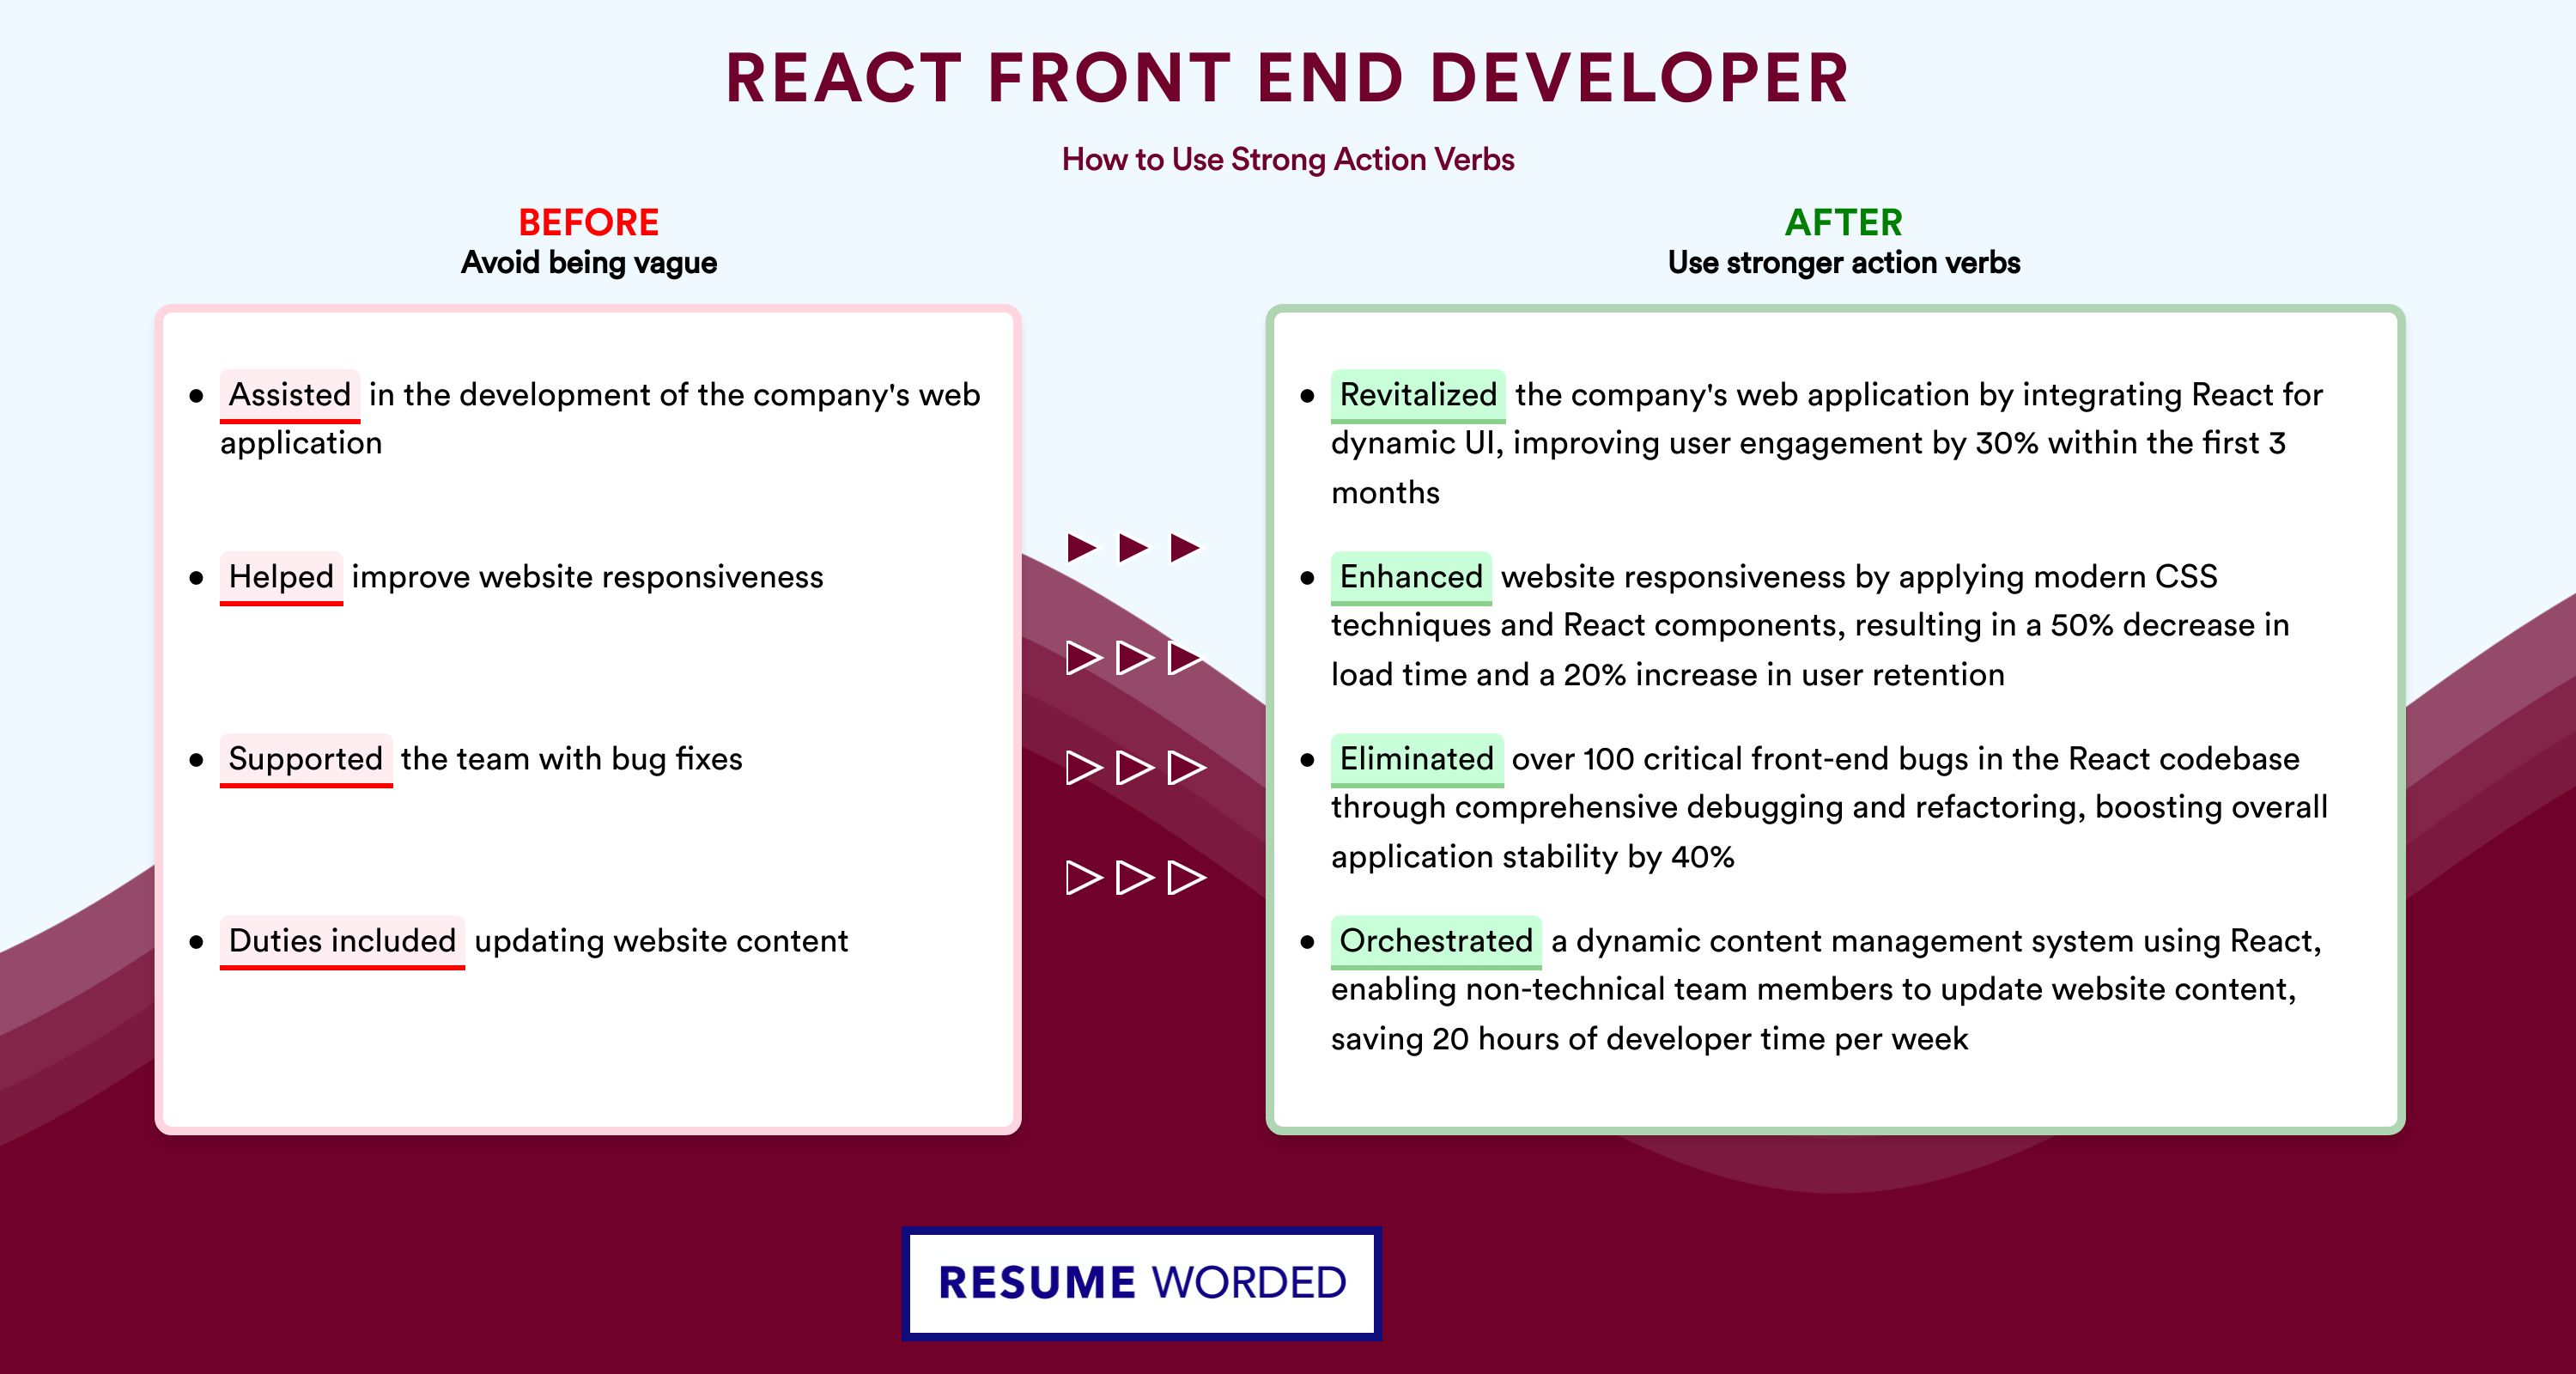 Action Verbs for React Front End Developer